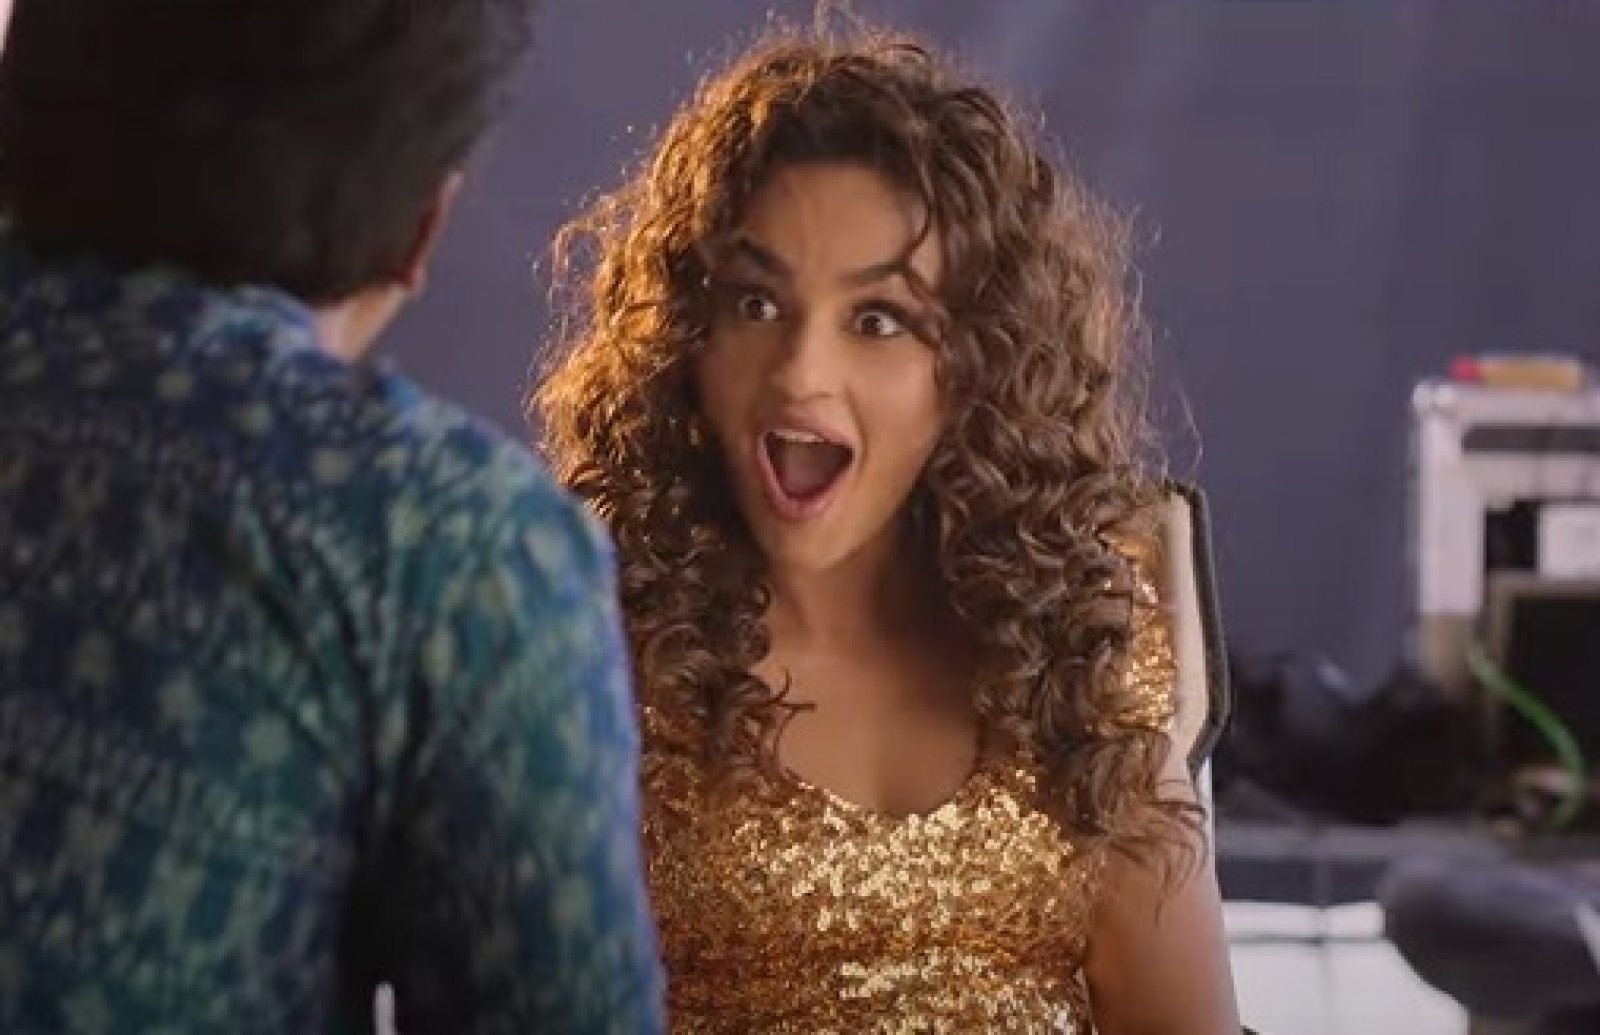 Seerat Kapoor Radiates Elegance and Charm In The Character of Hamslekha for Save the Tigers 2 Series with Hotstar Special-  Trailer Out Now